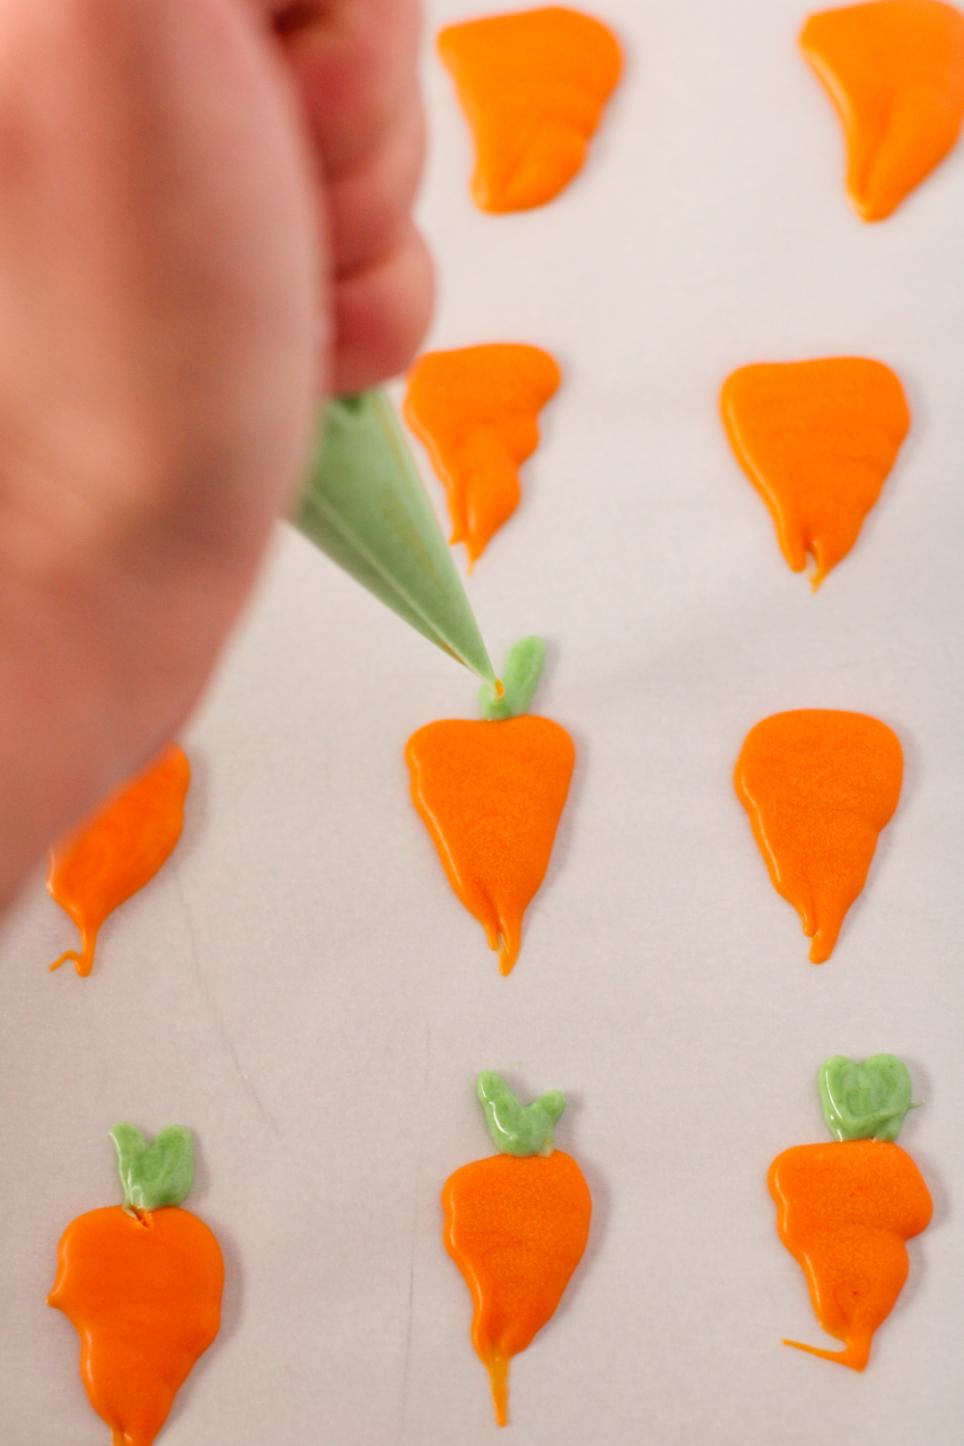 Use melted candy melts to make small carrots